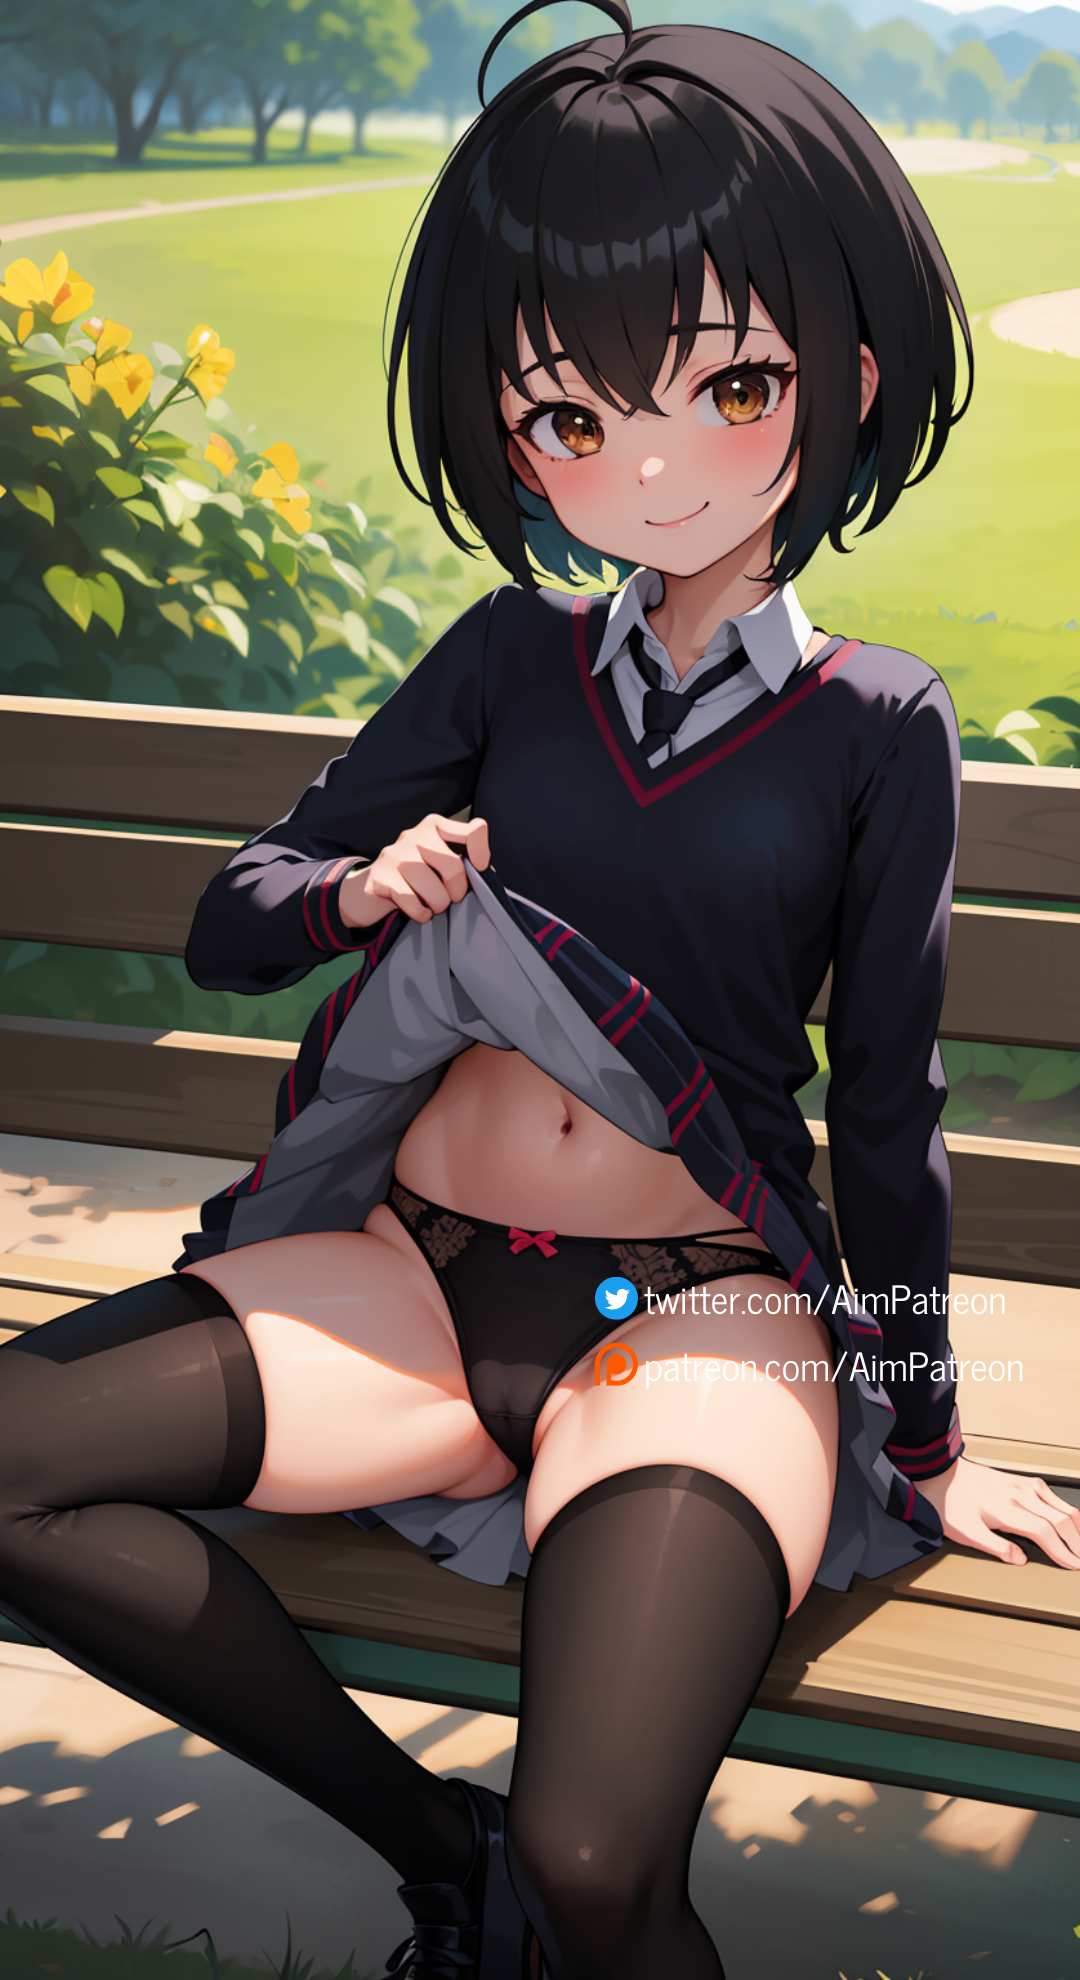 Anime 1080x1980 Peni Parker Spider-Man: Into the Spider-Verse anime girls belly underwear loli looking at viewer park school uniform AI art cameltoe panties stockings flashing lifting skirt sitting watermarked smiling short hair schoolgirl leaves flowers trees grass sunlight blushing